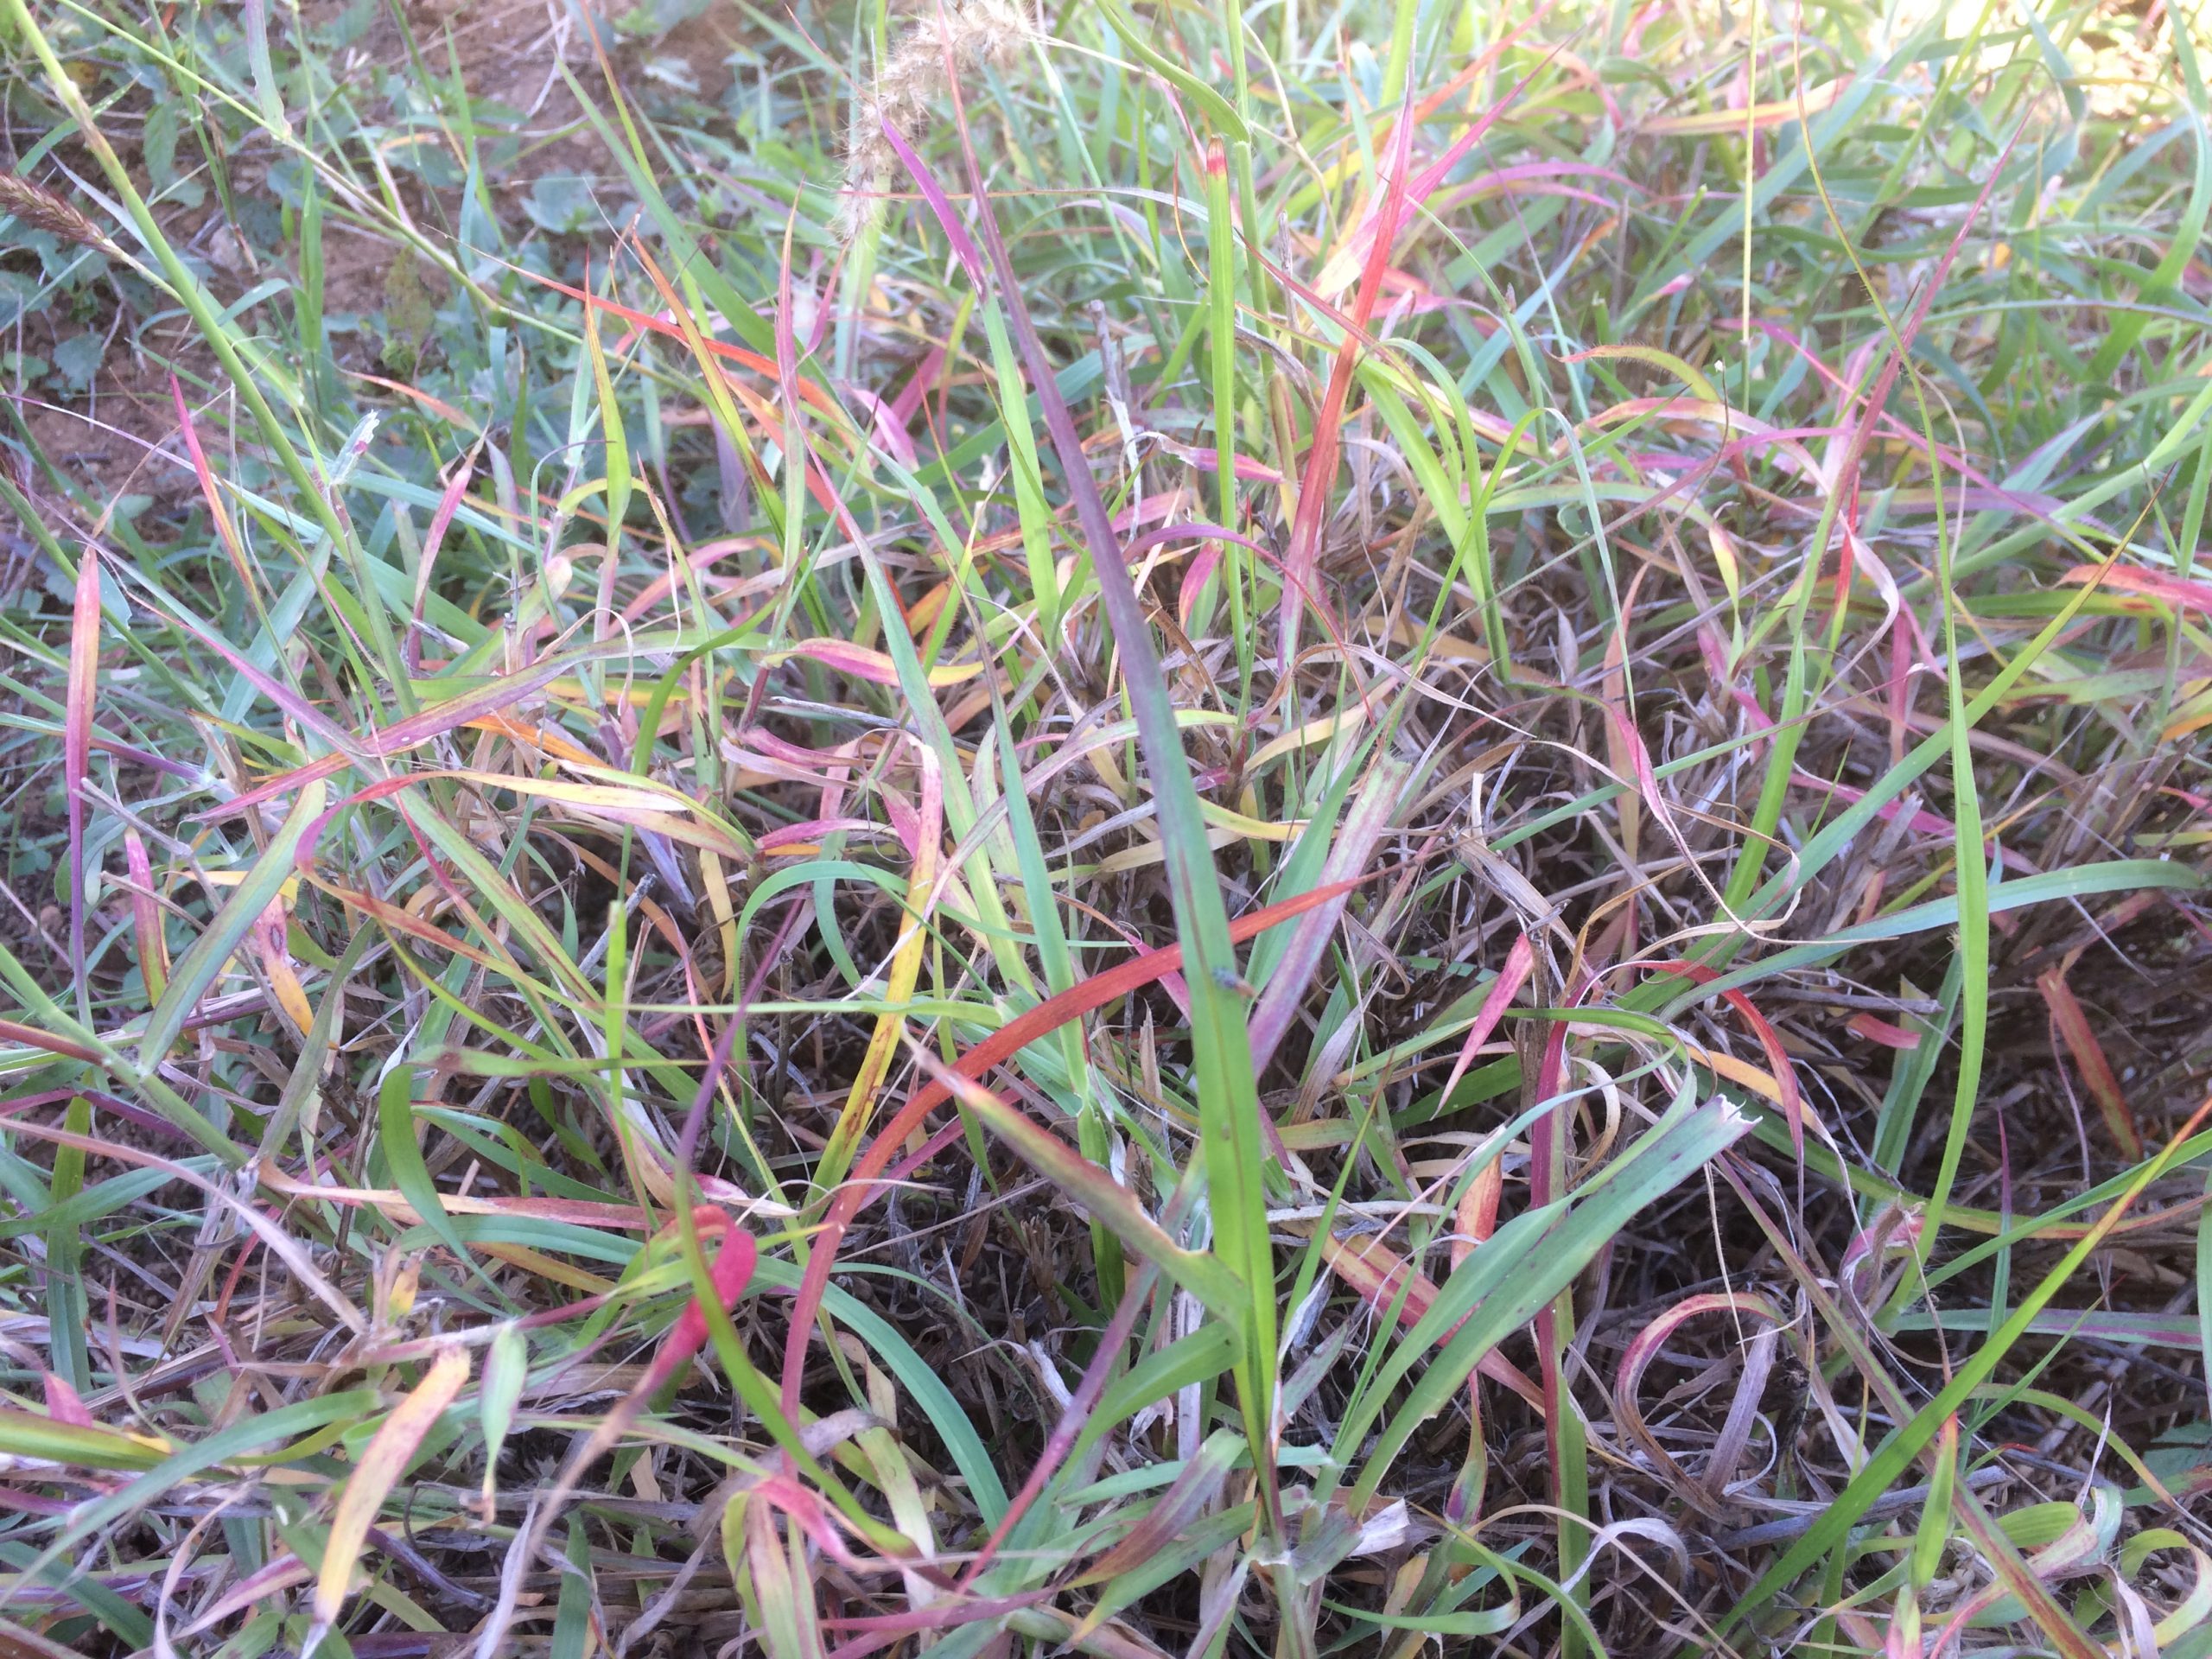 red and yellow leaves on a small buffel grass tussock